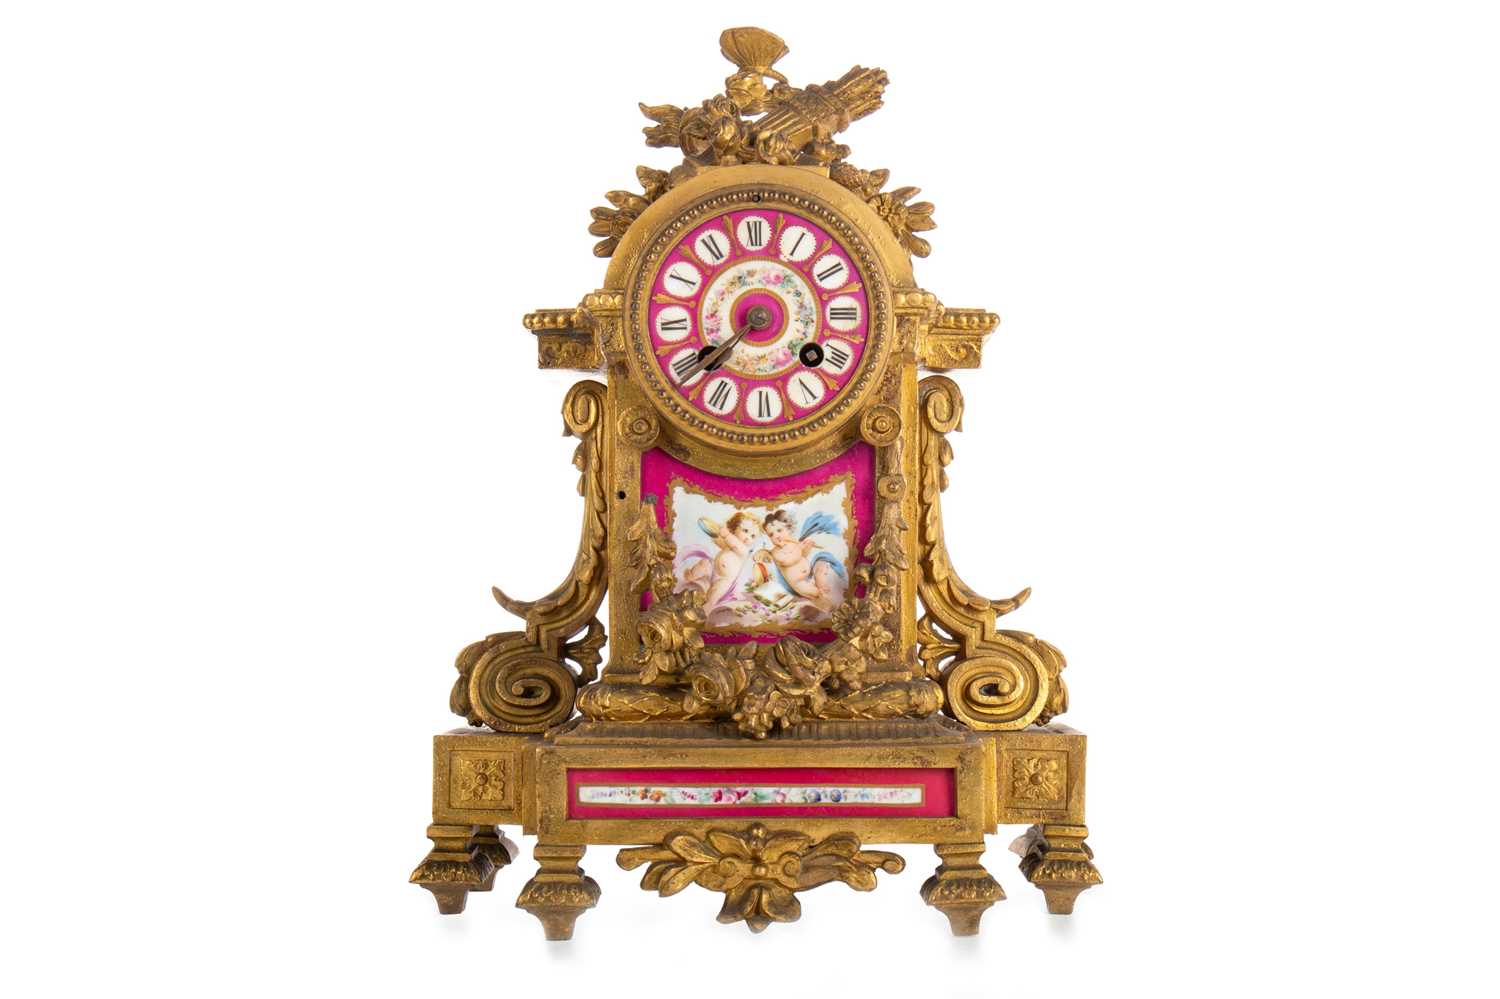 FRENCH GILT METAL AND PORCELAIN MANTEL CLOCK, LATE 19TH CENTURY